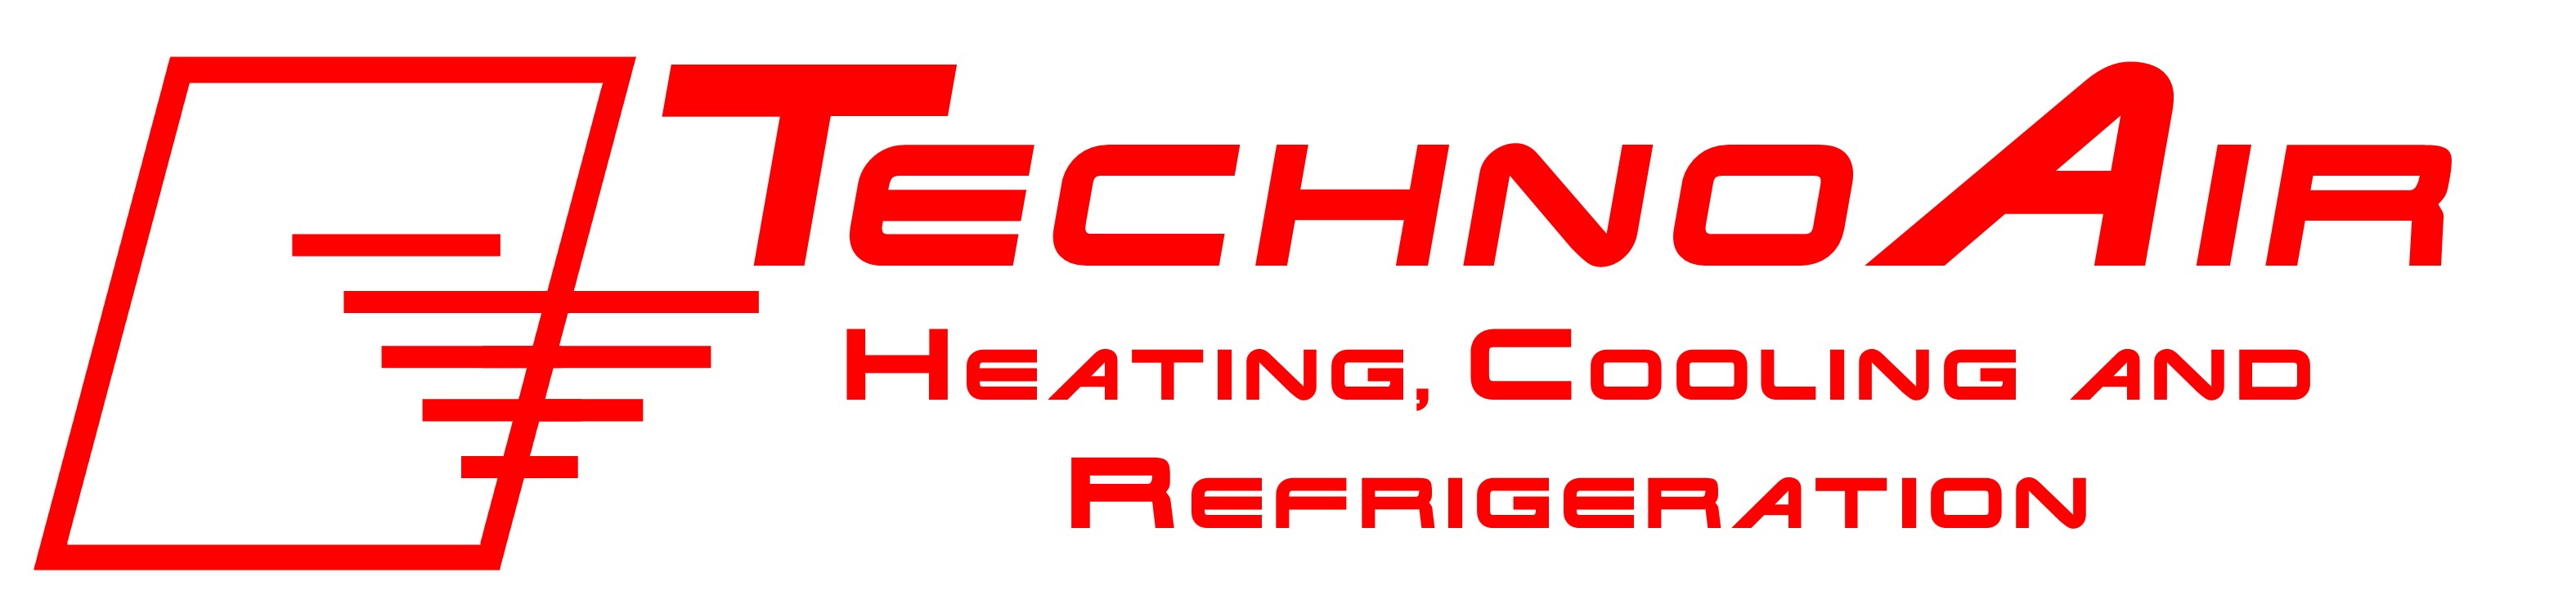 TechnoAir Heating, Cooling, and Refrigeration